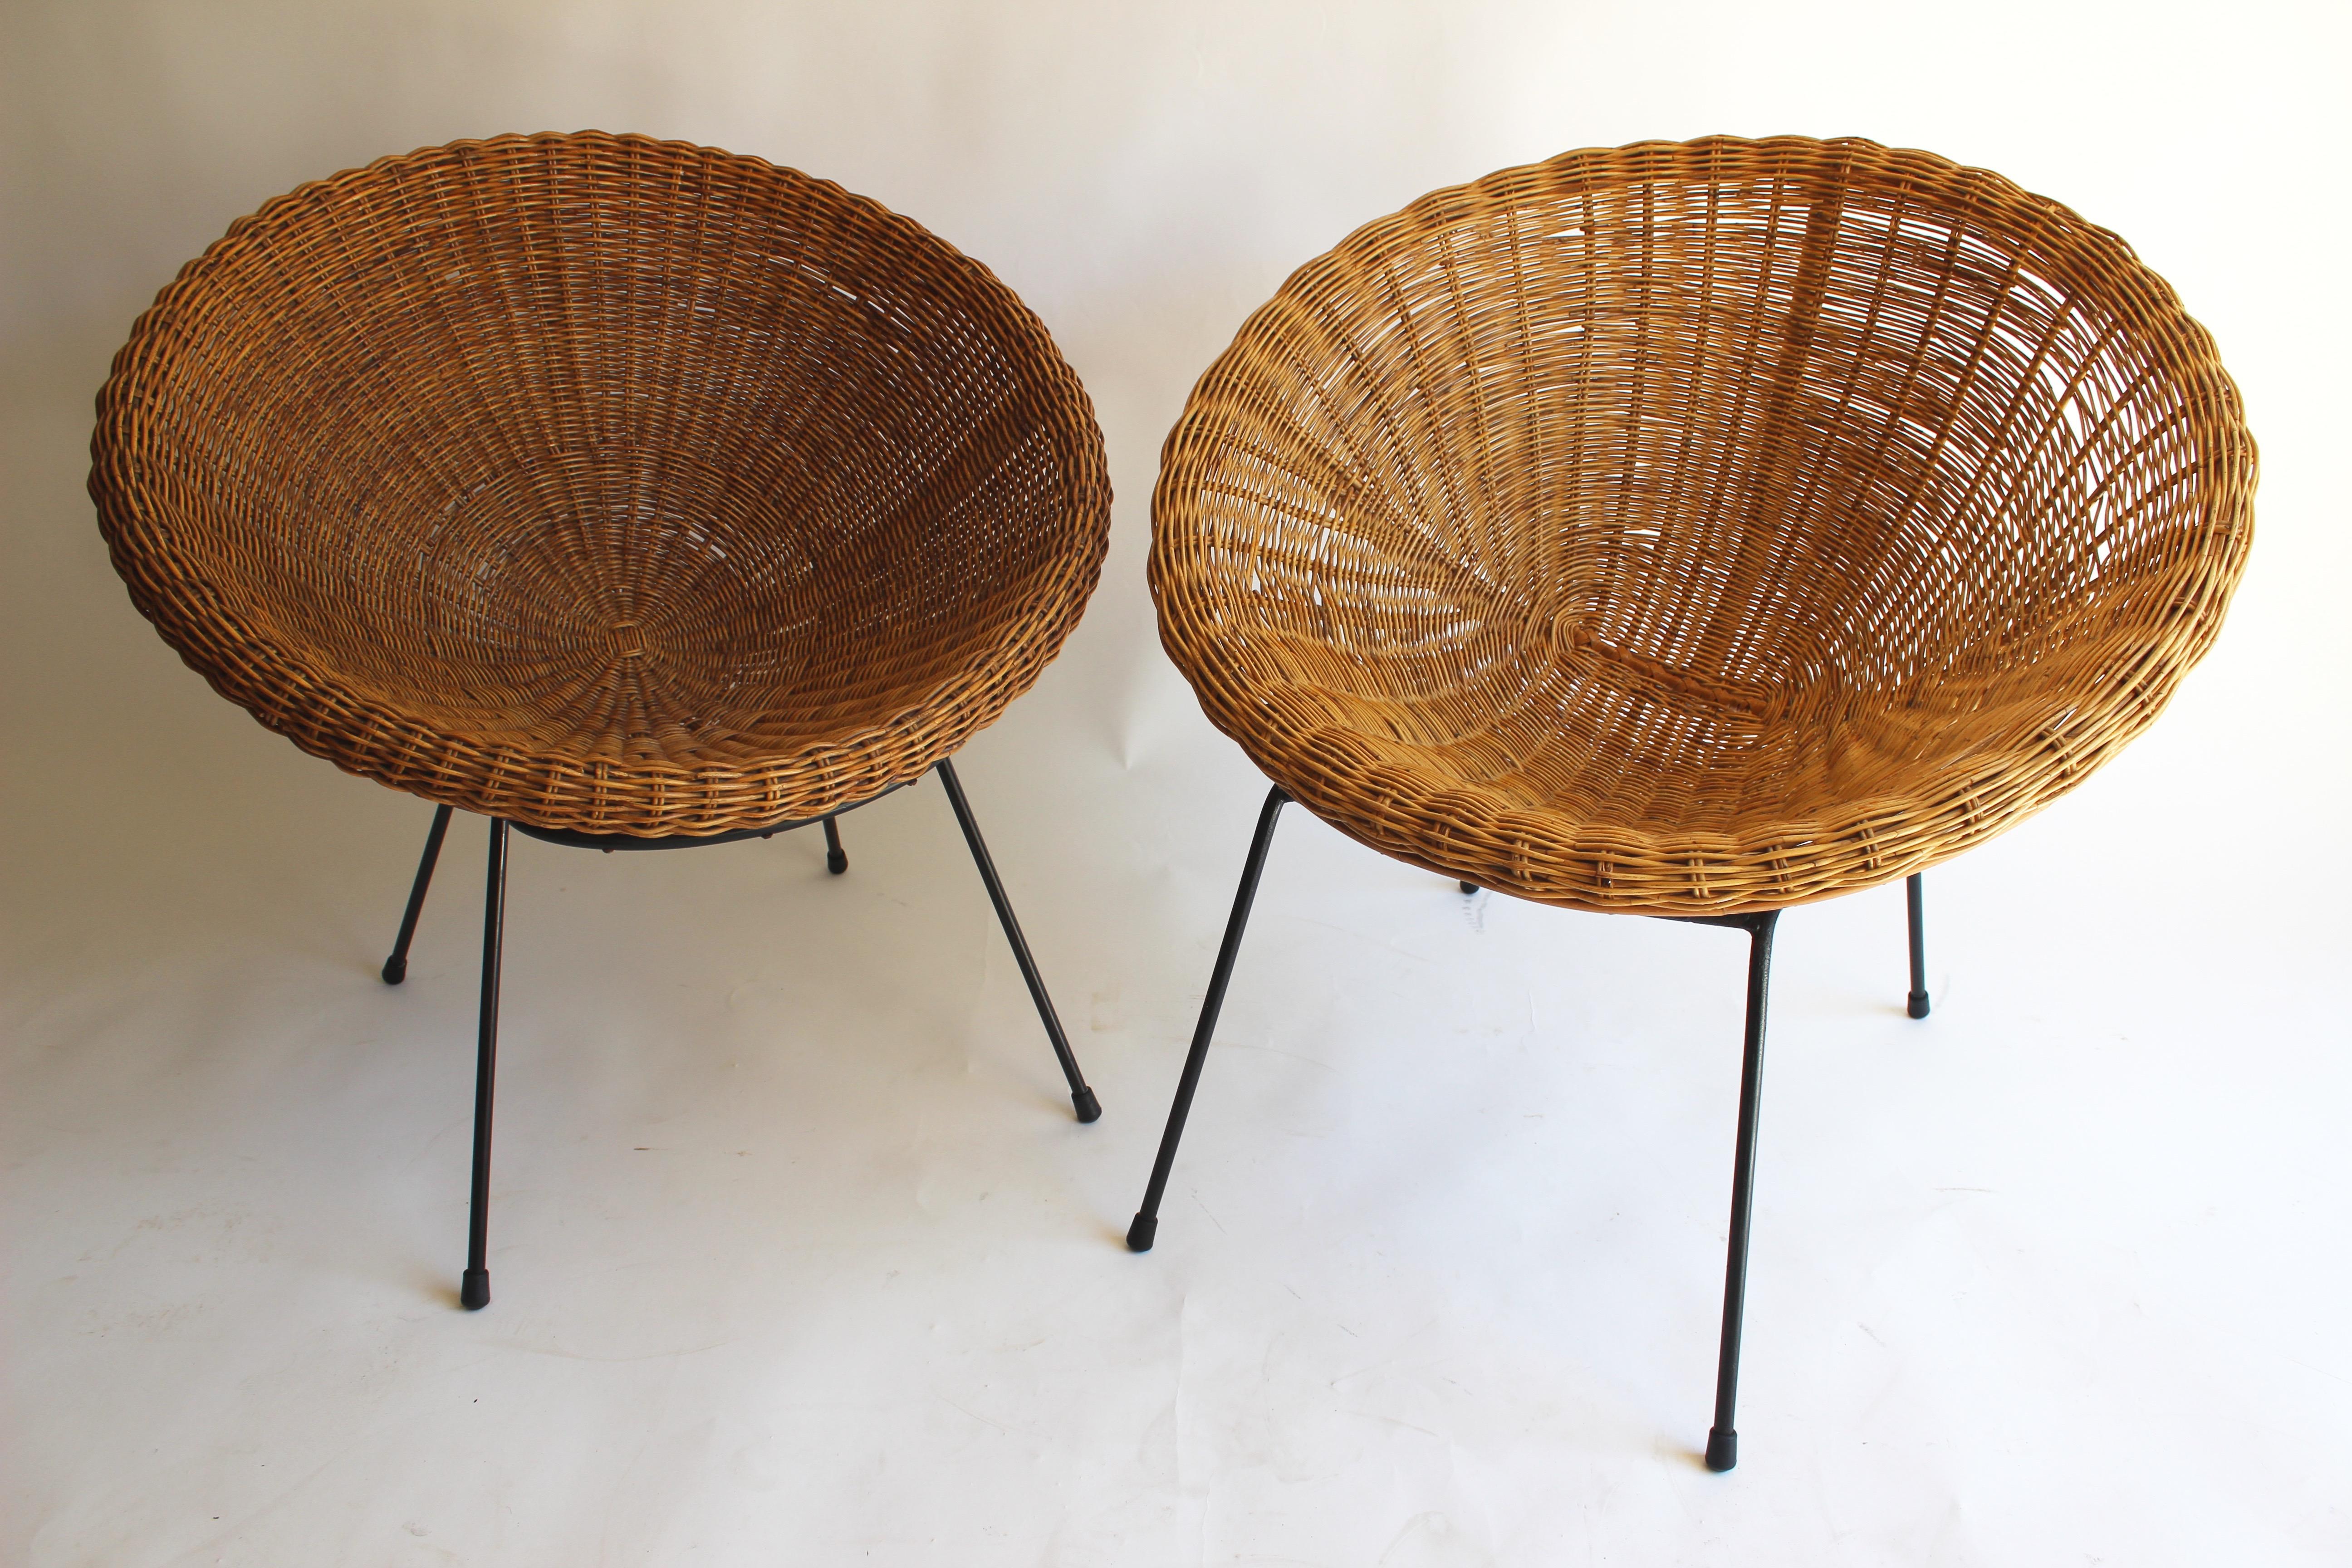 Near pair of rattan and iron lounge chairs in the style of Franco Albini.

They slightly differ in size:
Measures: Smaller: 28